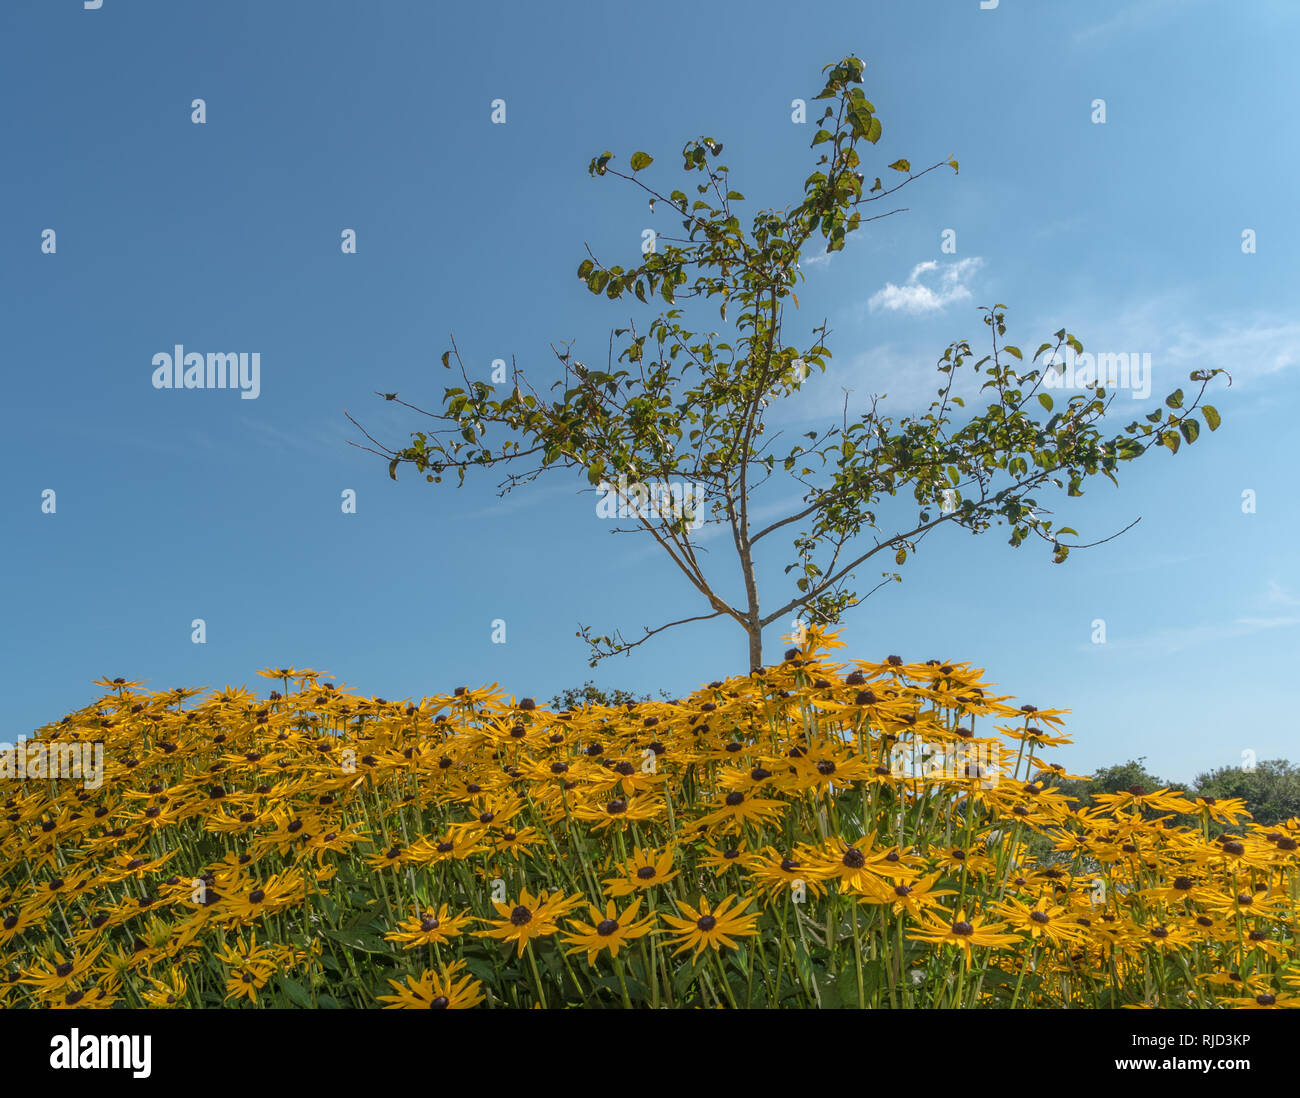 Tall stem yellow flowers facing towards the sky with a young tree behind off centre. A bright blue summer sky in the background. Countryside. Stock Photo